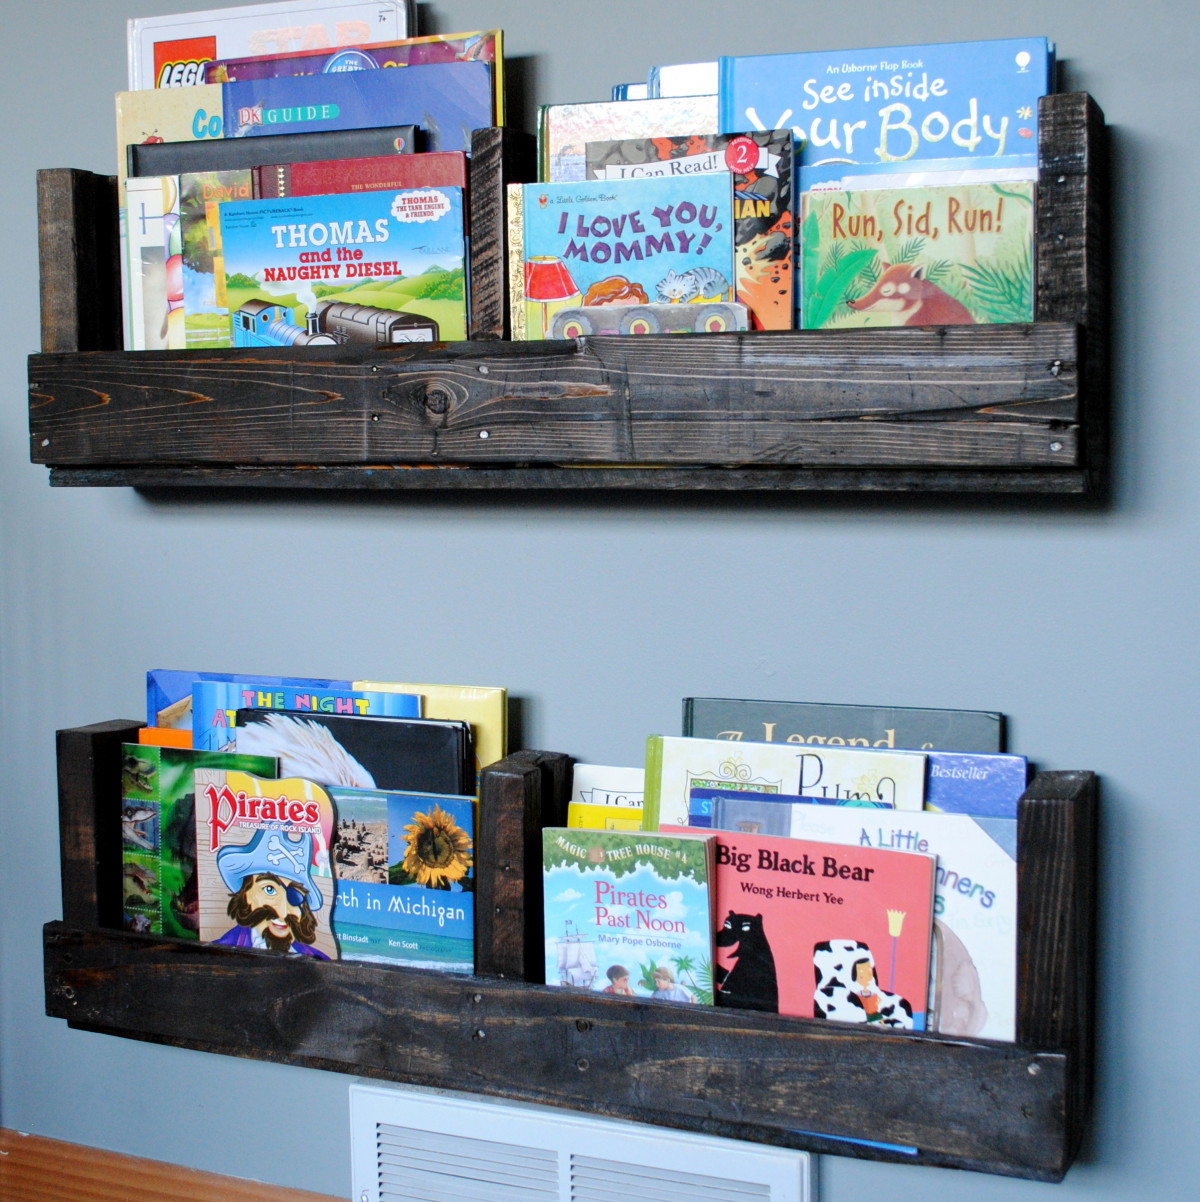 How To Make A Pallet Bookshelf Jenna, Shelves Made Out Of Pallets